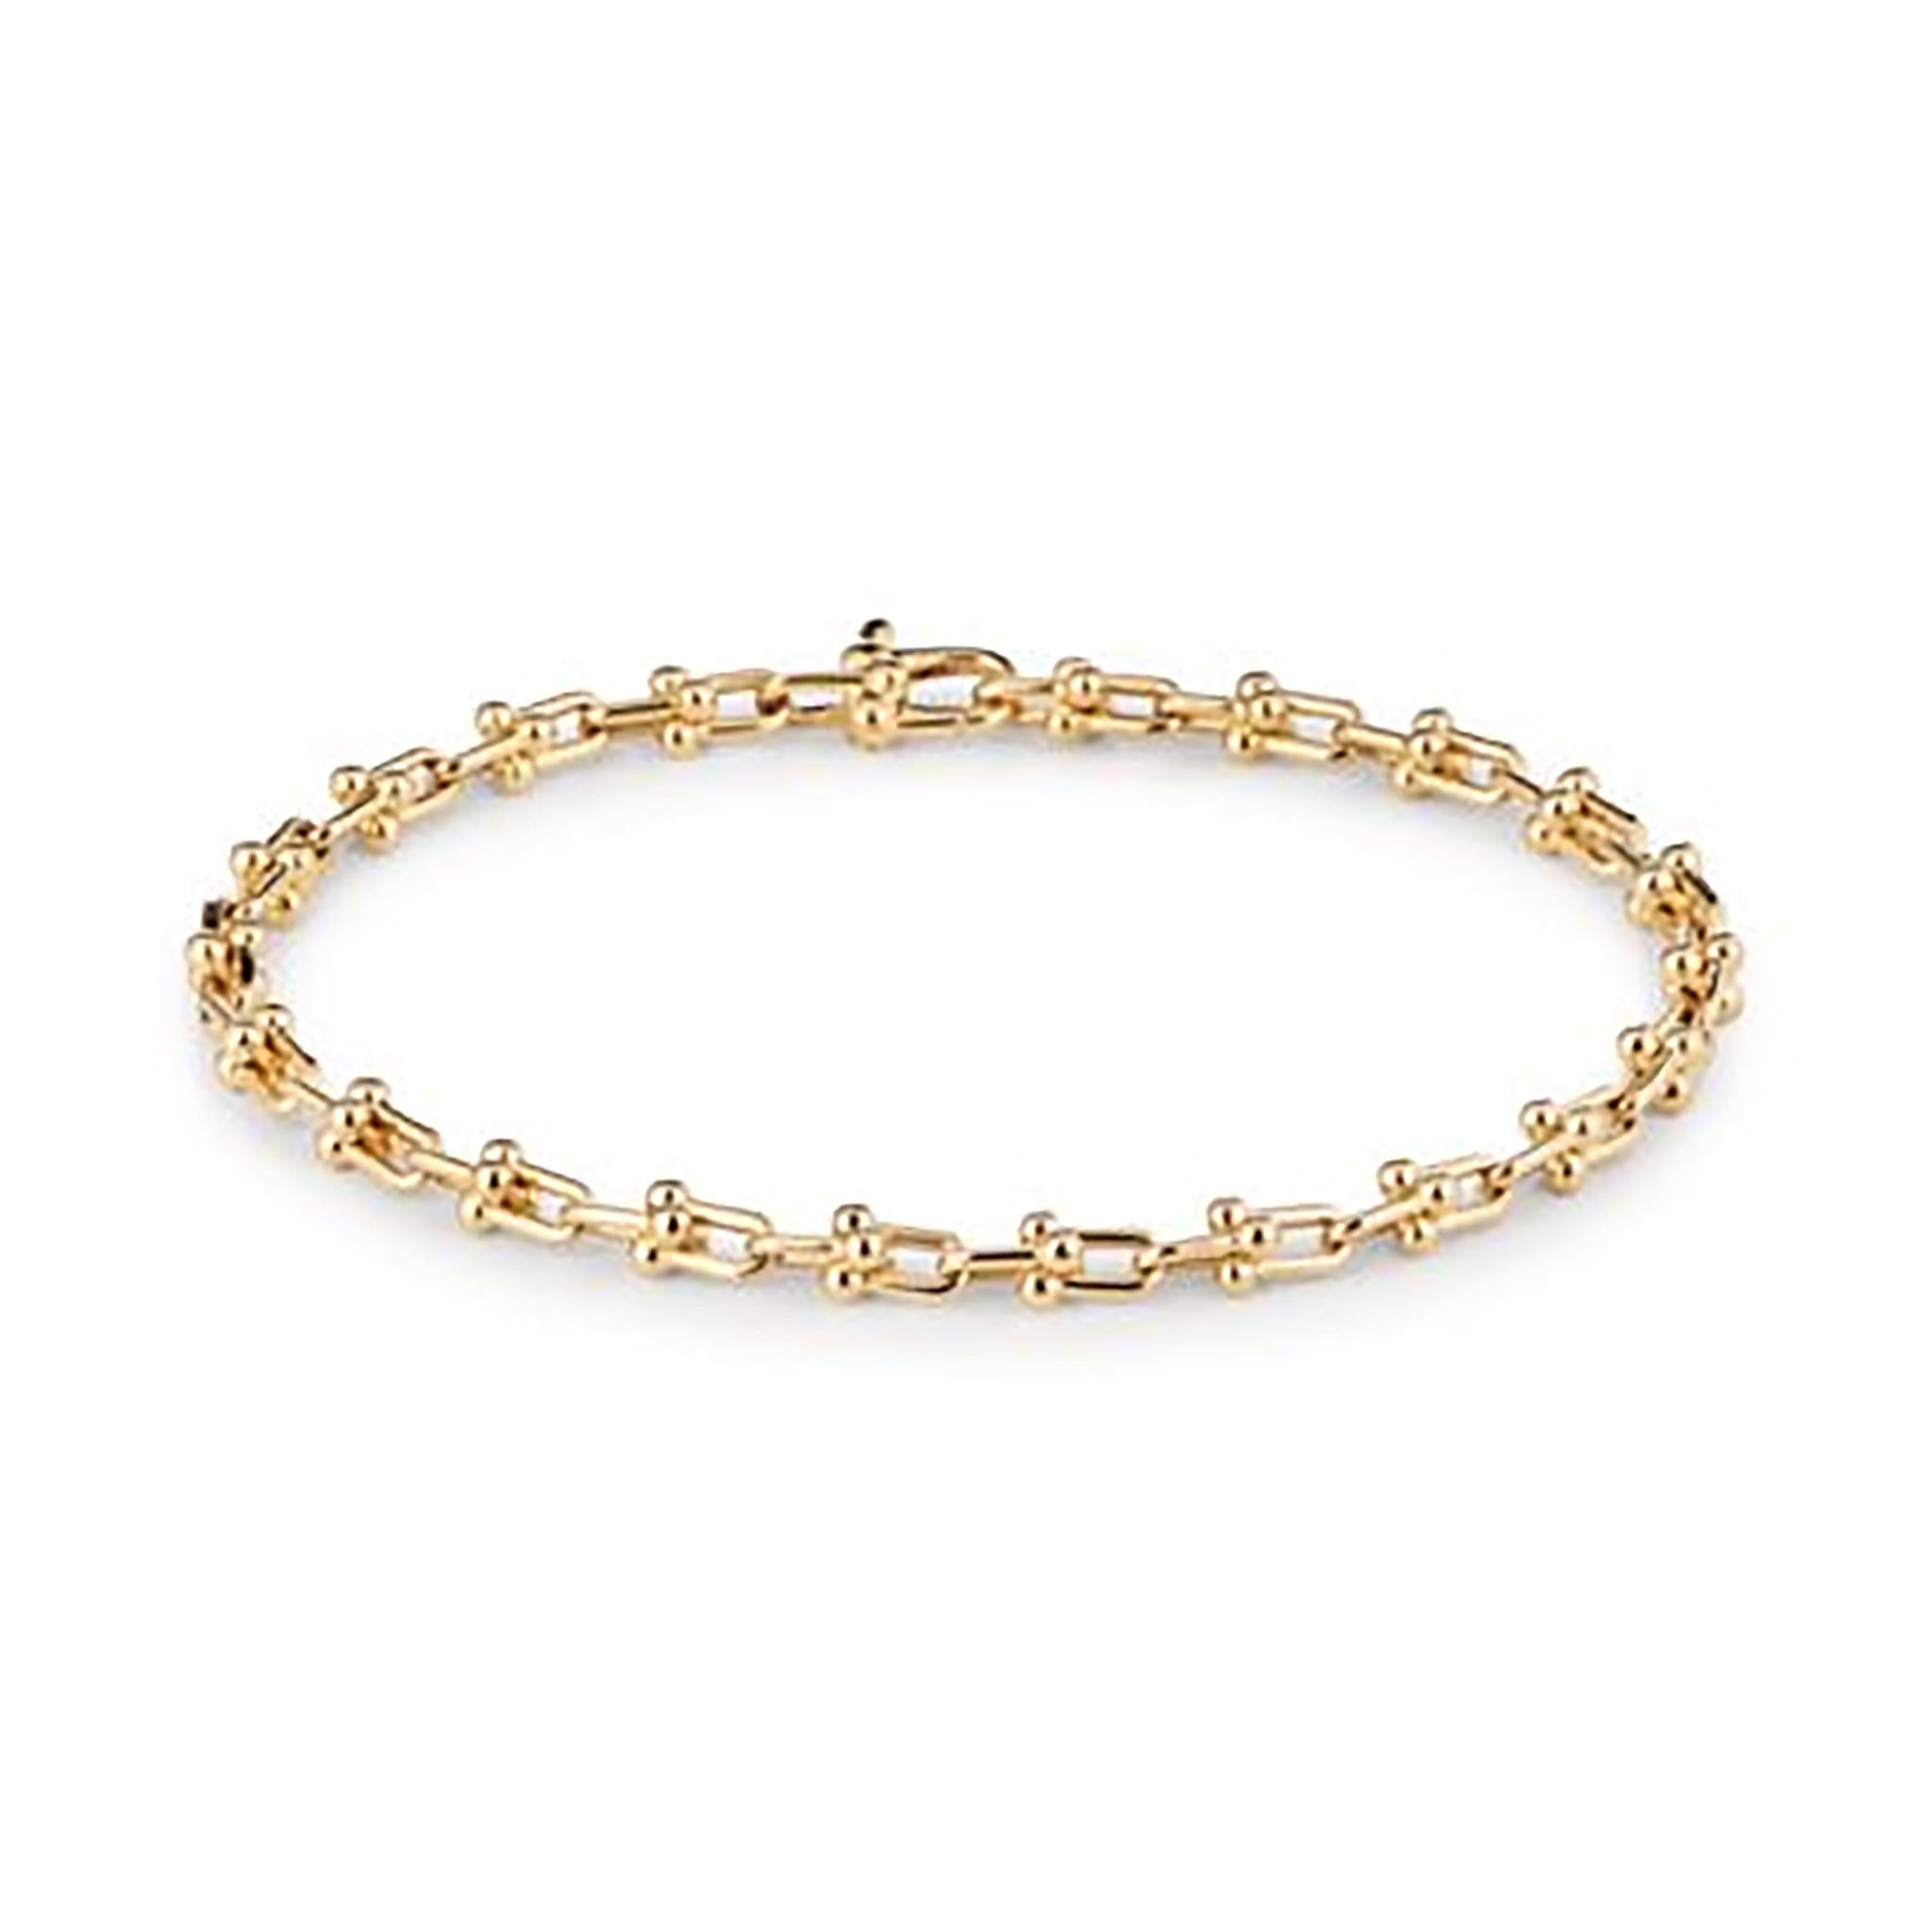 18 kt Yellow Gold
Length: 6.75 inches
Total Weight: 10.4 grams